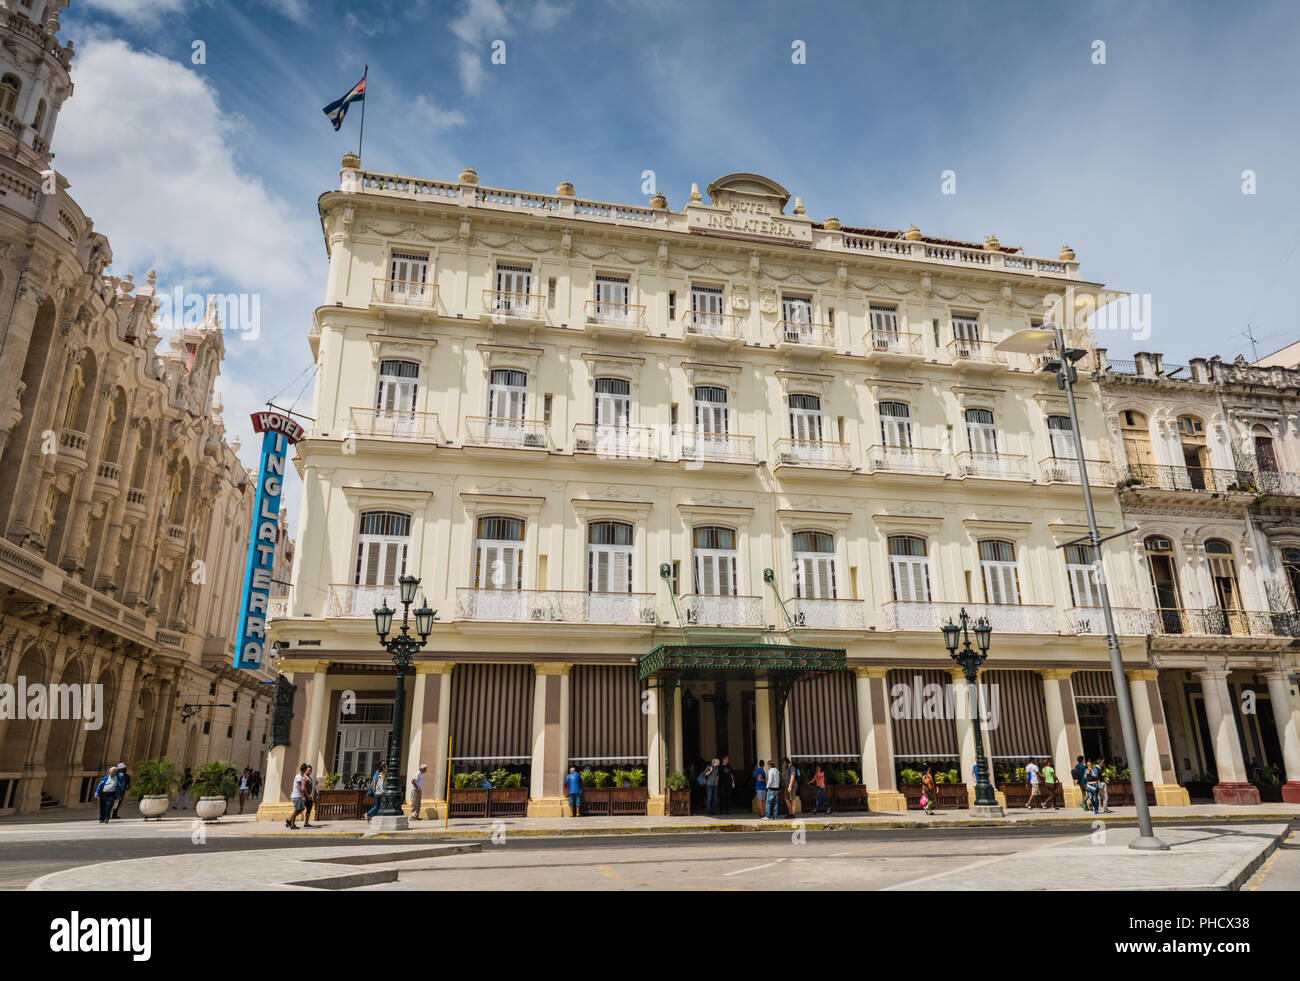 Historic Old Havana hotel with Colonial architecture  dating from 1875, located opposite Parque Central near Gran Teatro de La Habana. Stock Photo